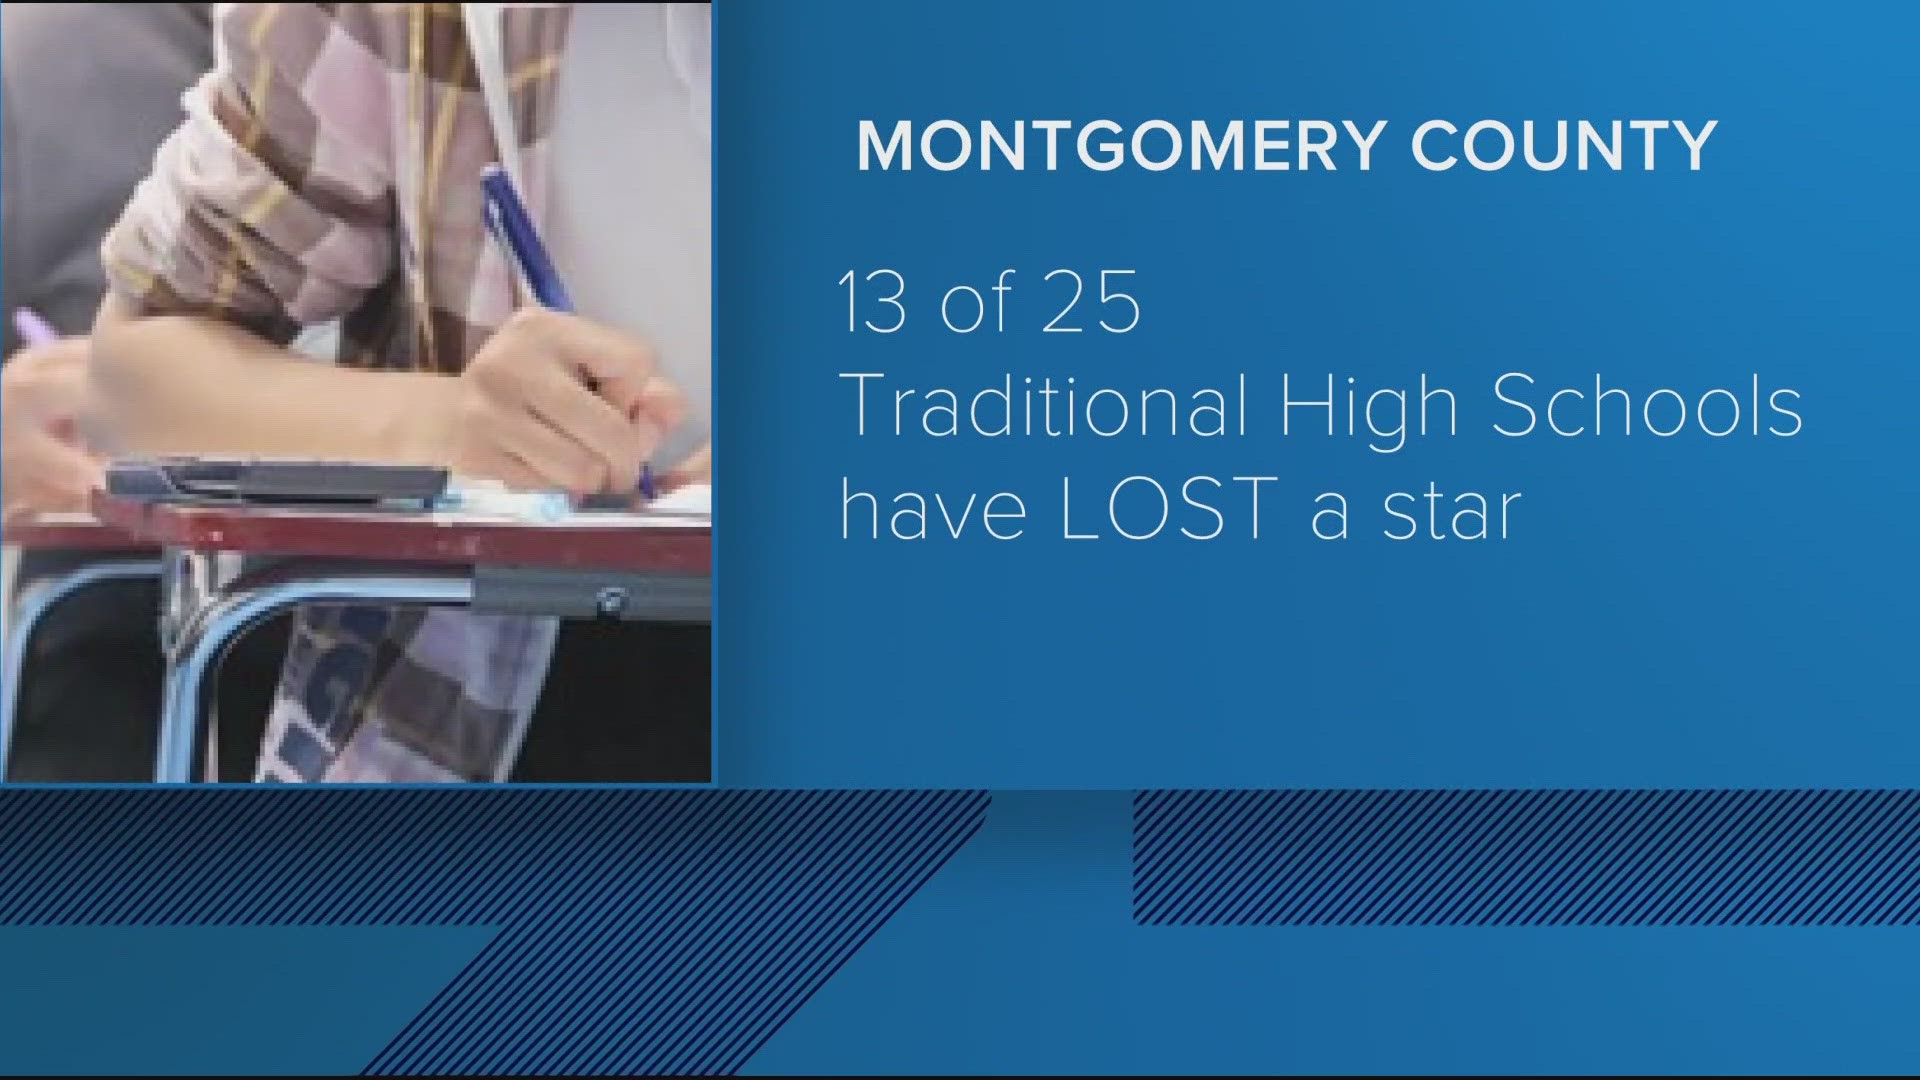 A new Maryland State Department of Education report card lowered the rankings at 66 Montgomery County Public Schools, while cautioning that metrics have changed.